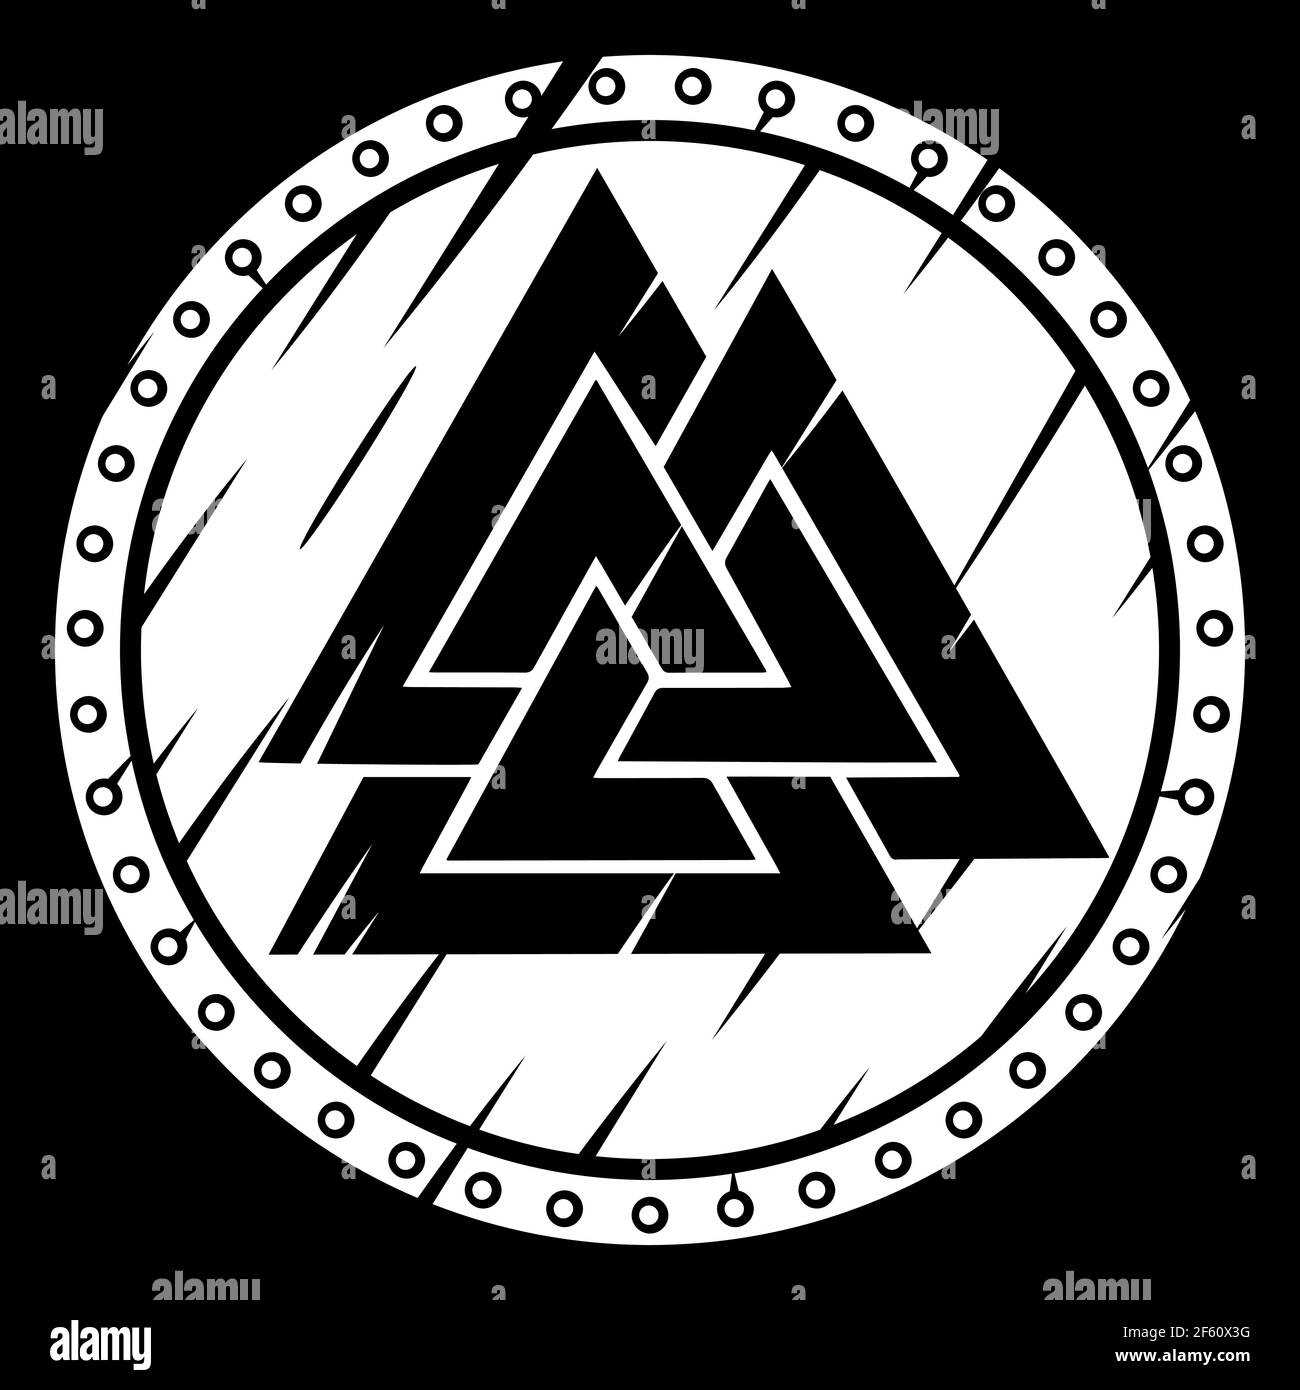 Scandinavian Viking design. Viking shield and the sign of the Old Norse God Odin - Valknut Stock Vector